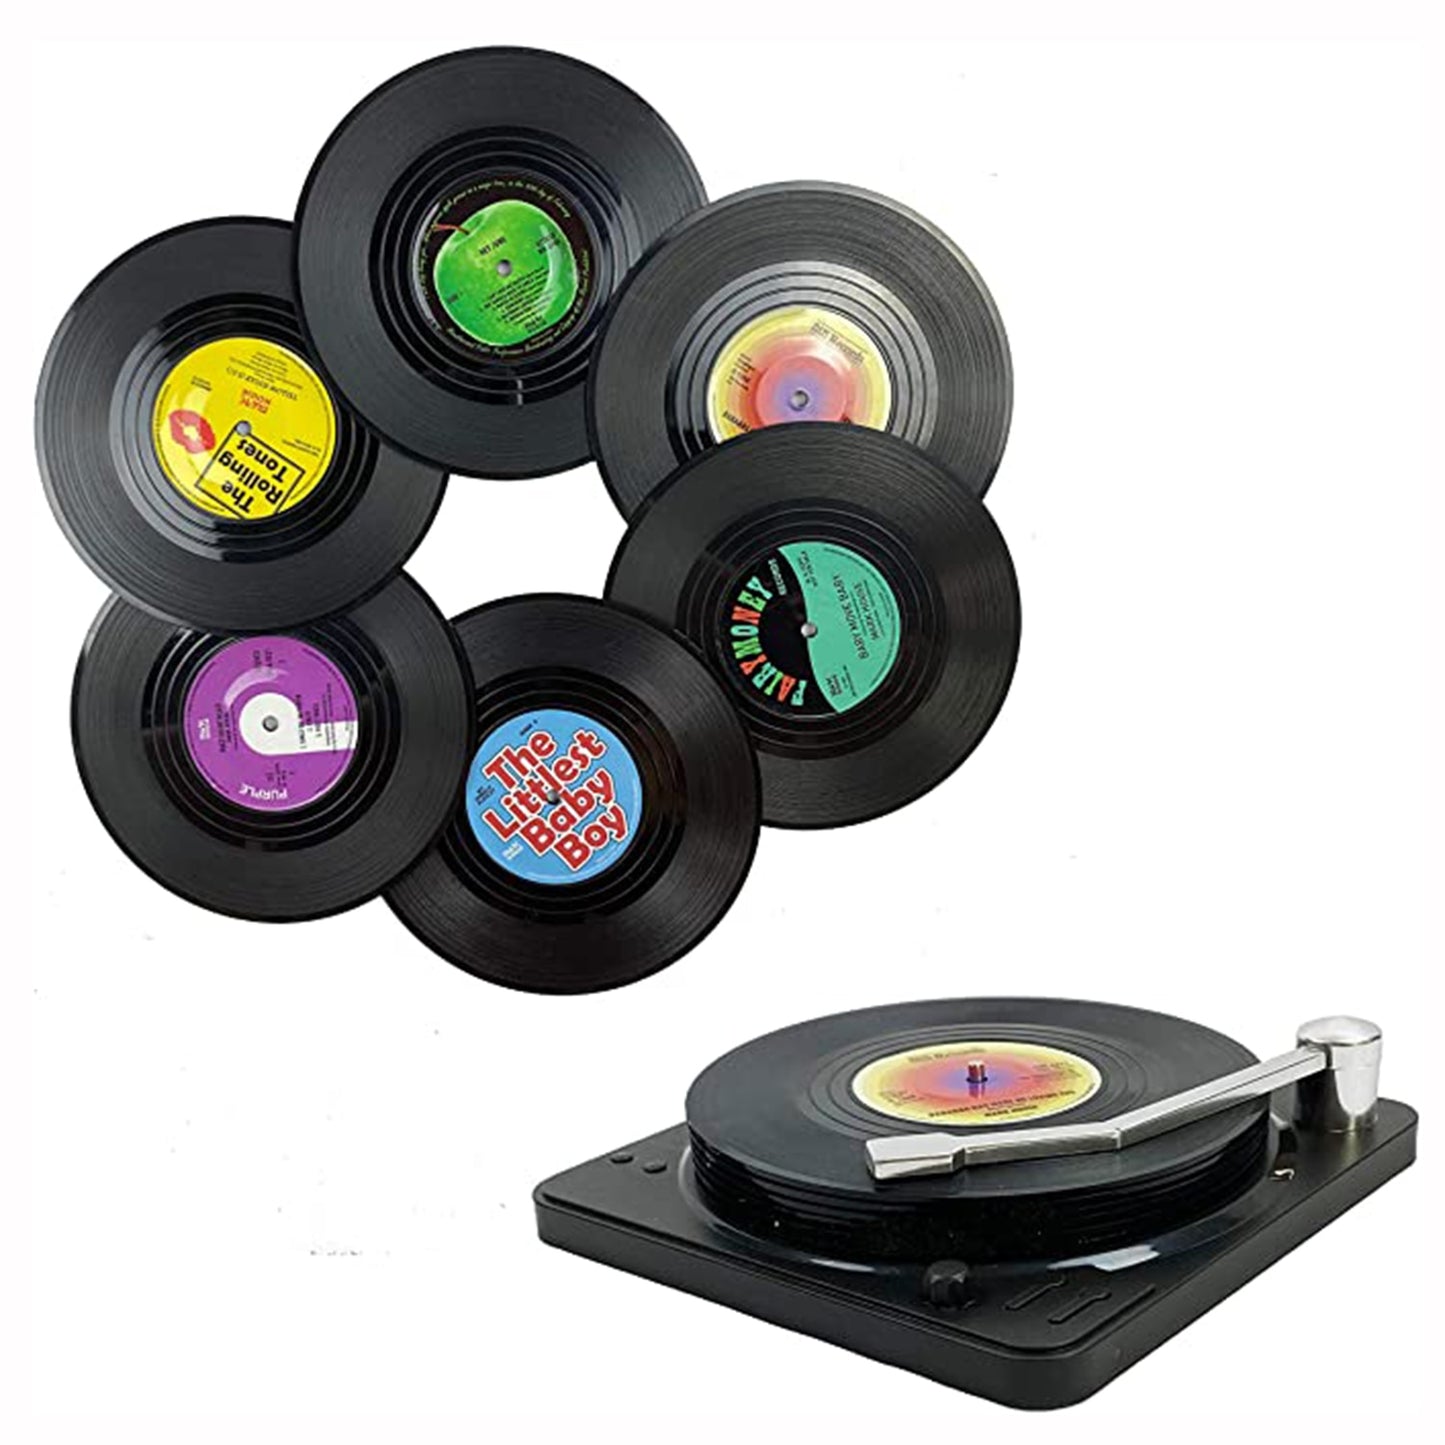 Vinyl Disk Coasters With Holder